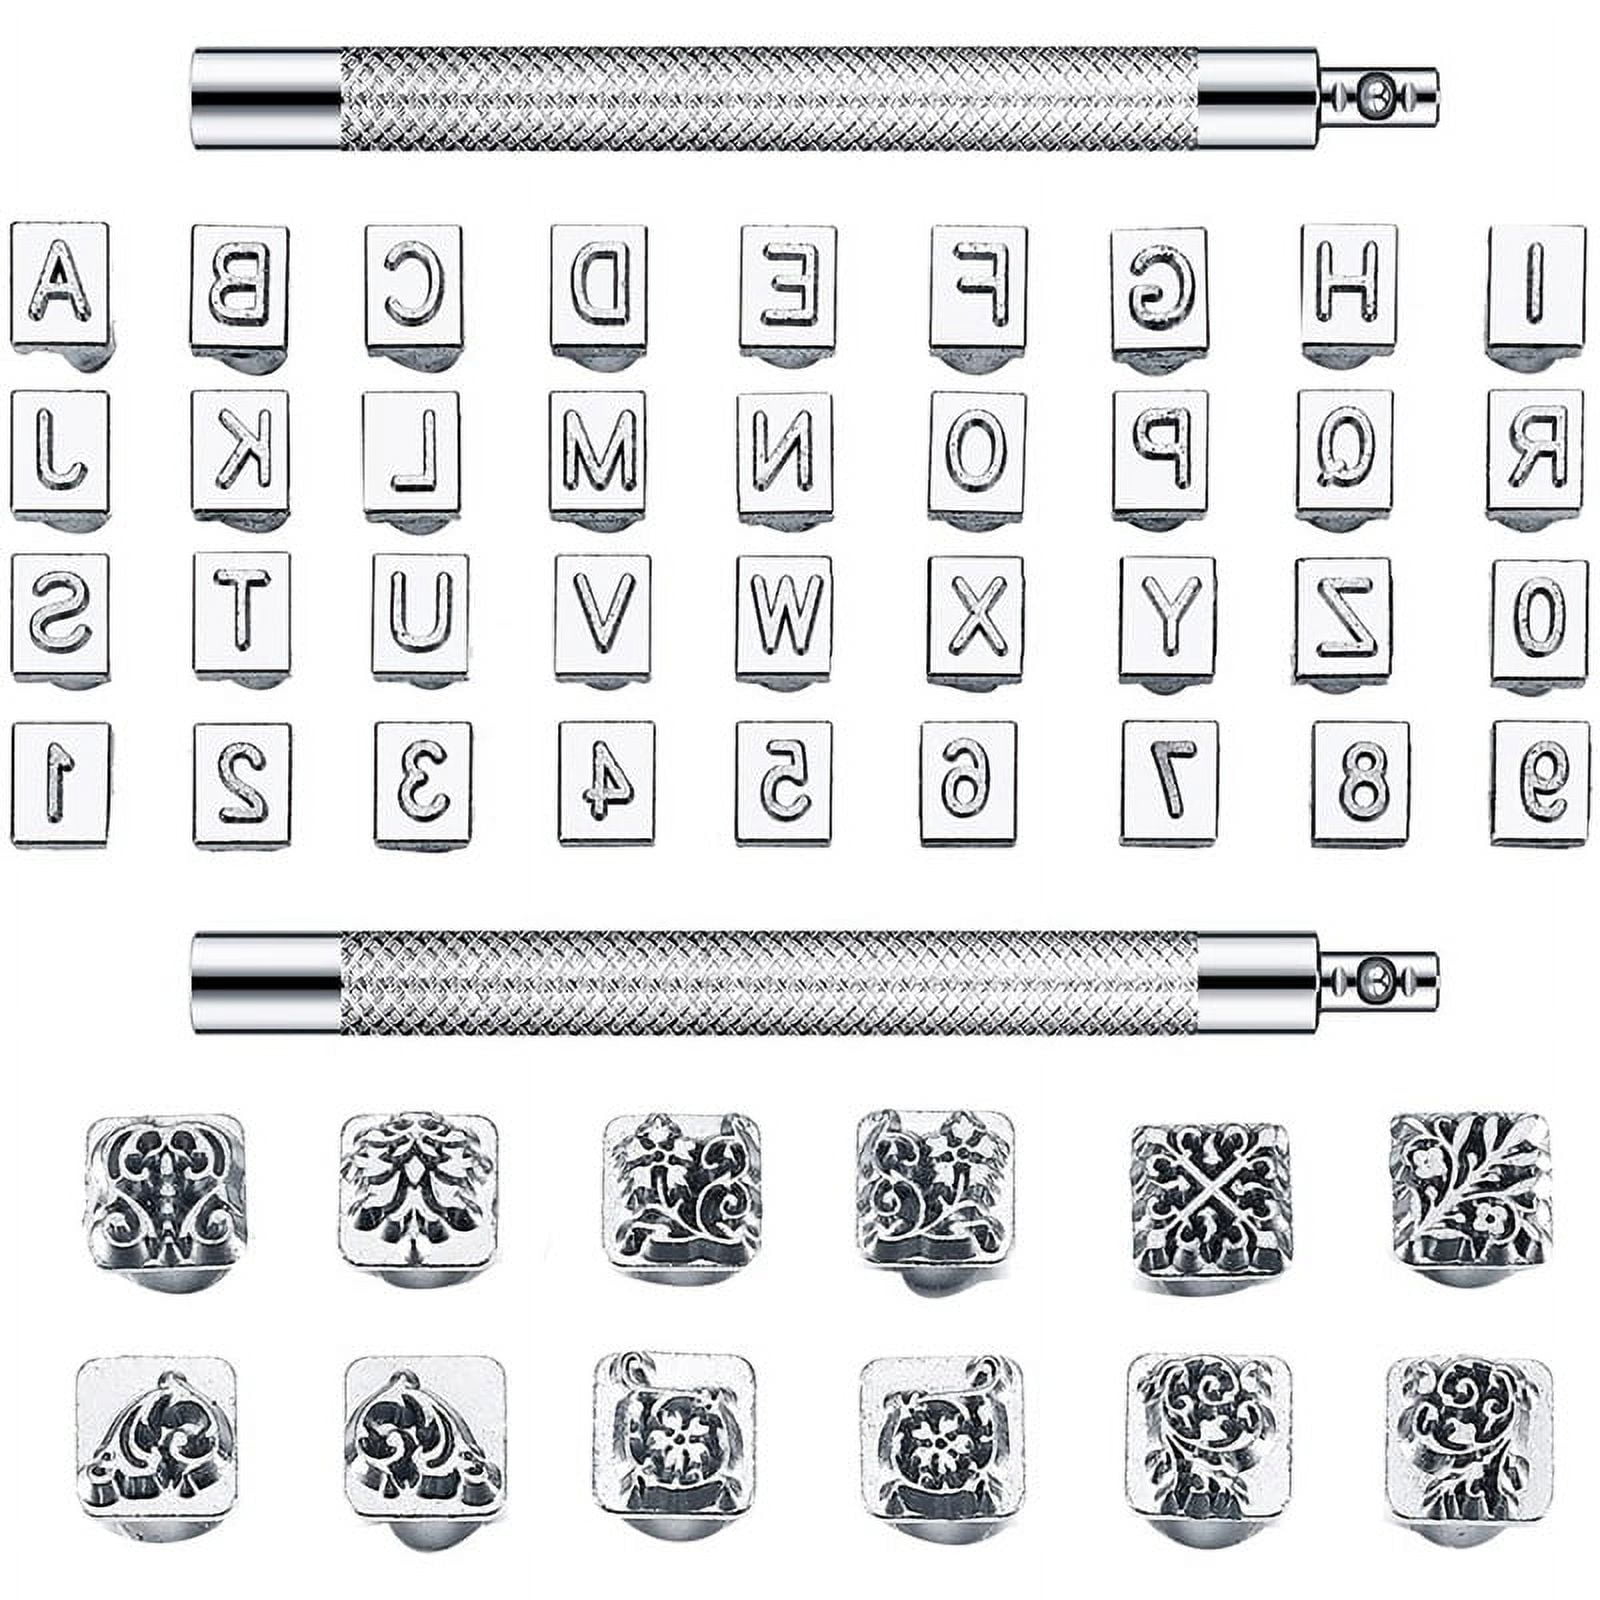 HORUSDY 37-Piece Number and Letter Stamp Set 1/4 (6mm) (A-Z & 0-9 + Stars)  Punch Perfect for Imprinting Metal Stamping kit, Plastic, Wood, Leather